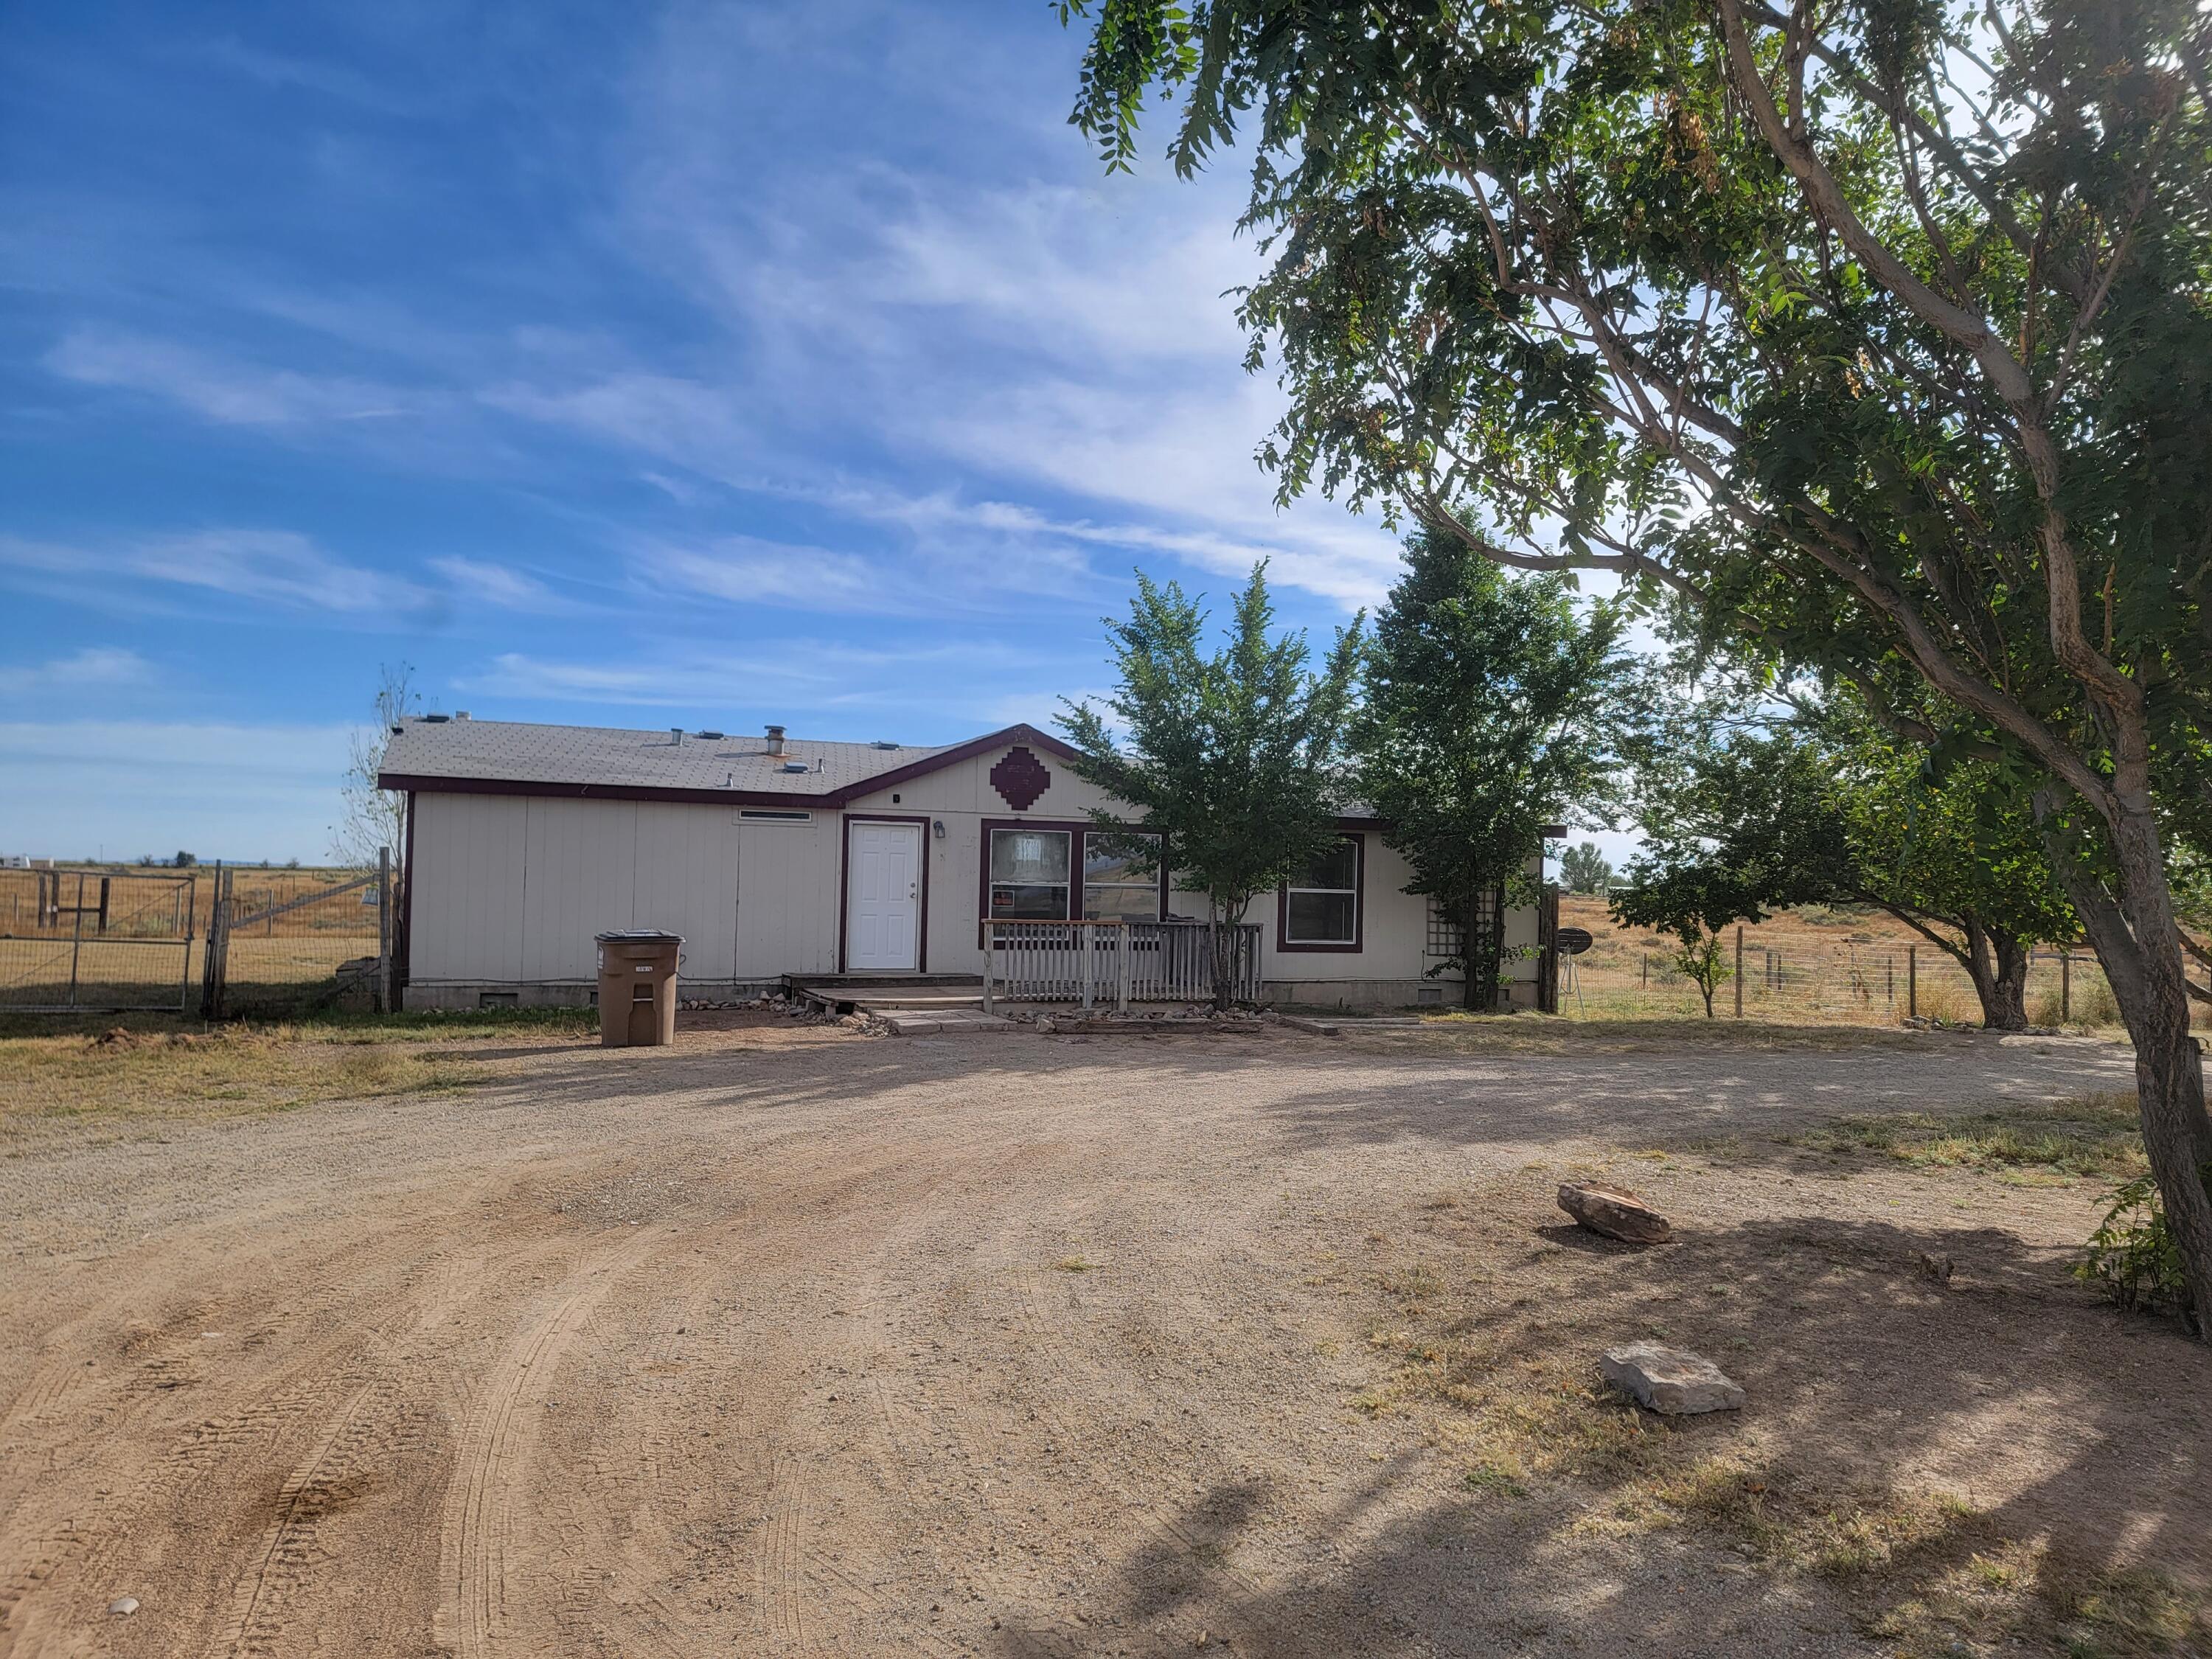 Handyman special! Bring the finishing touches and make this home your own! Lots of potential with this one. Home is being sold ''as is''. Schedule your showing today!